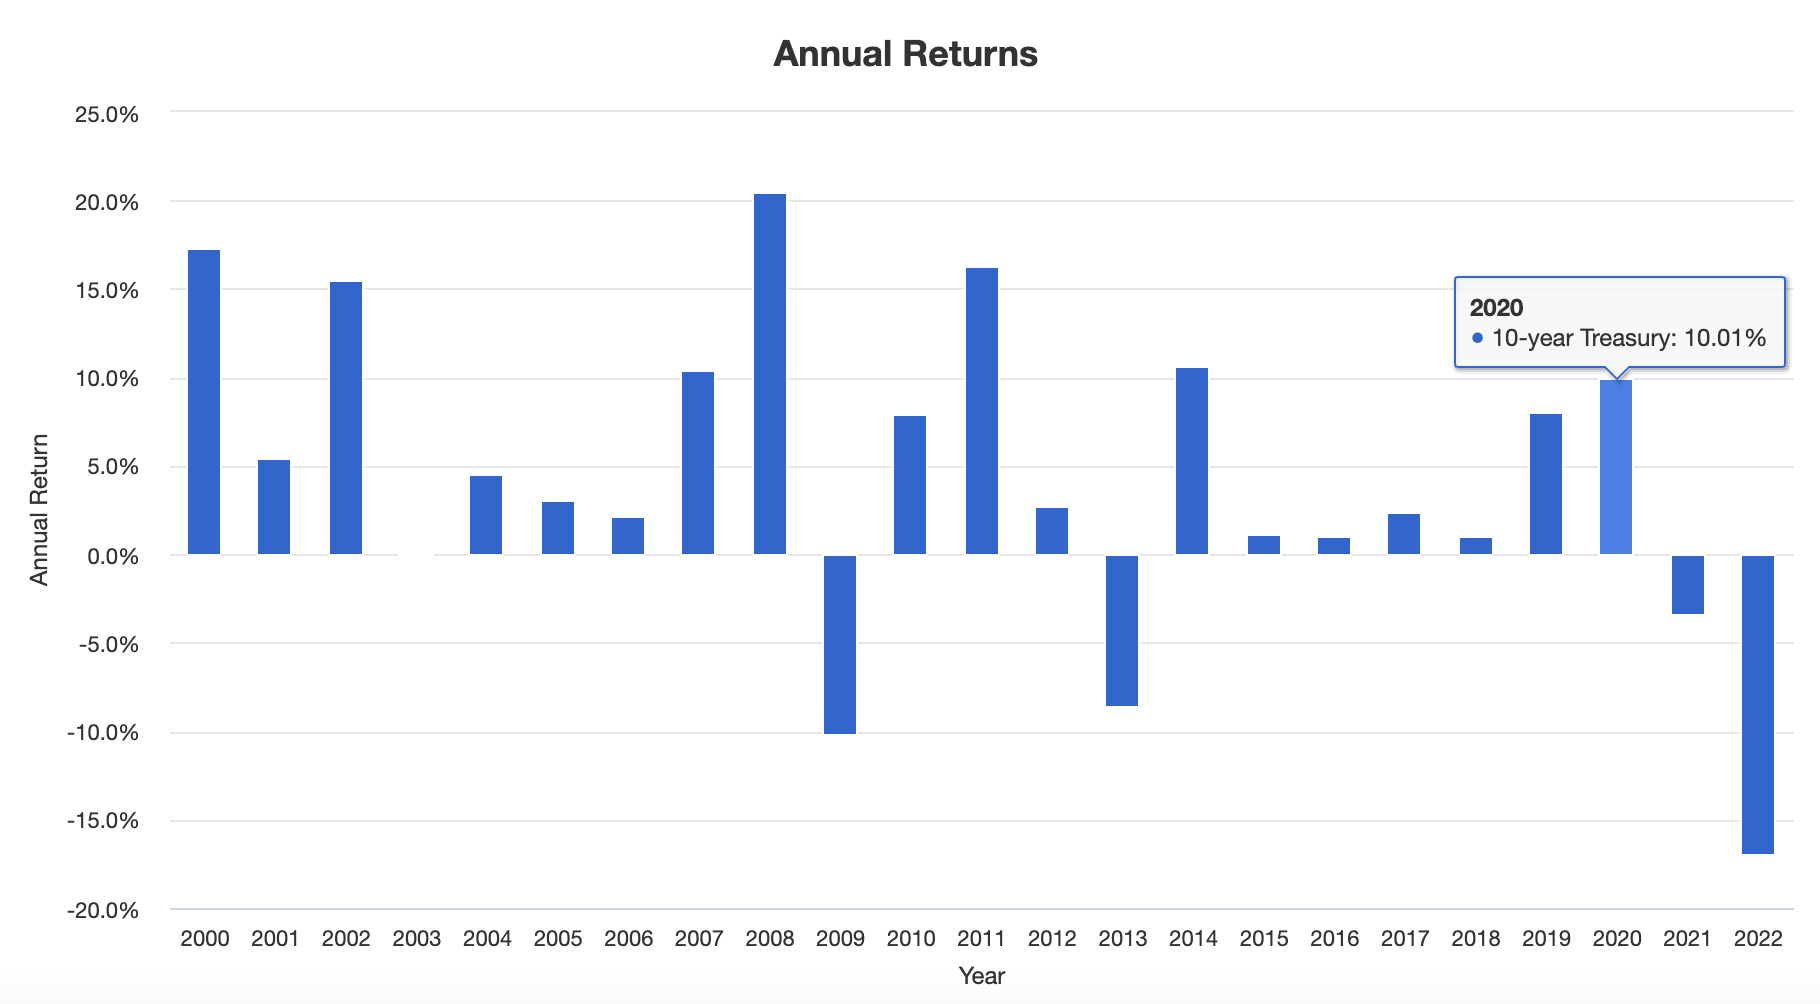 10 Year Treasury Annual Returns from 2000 until 2022